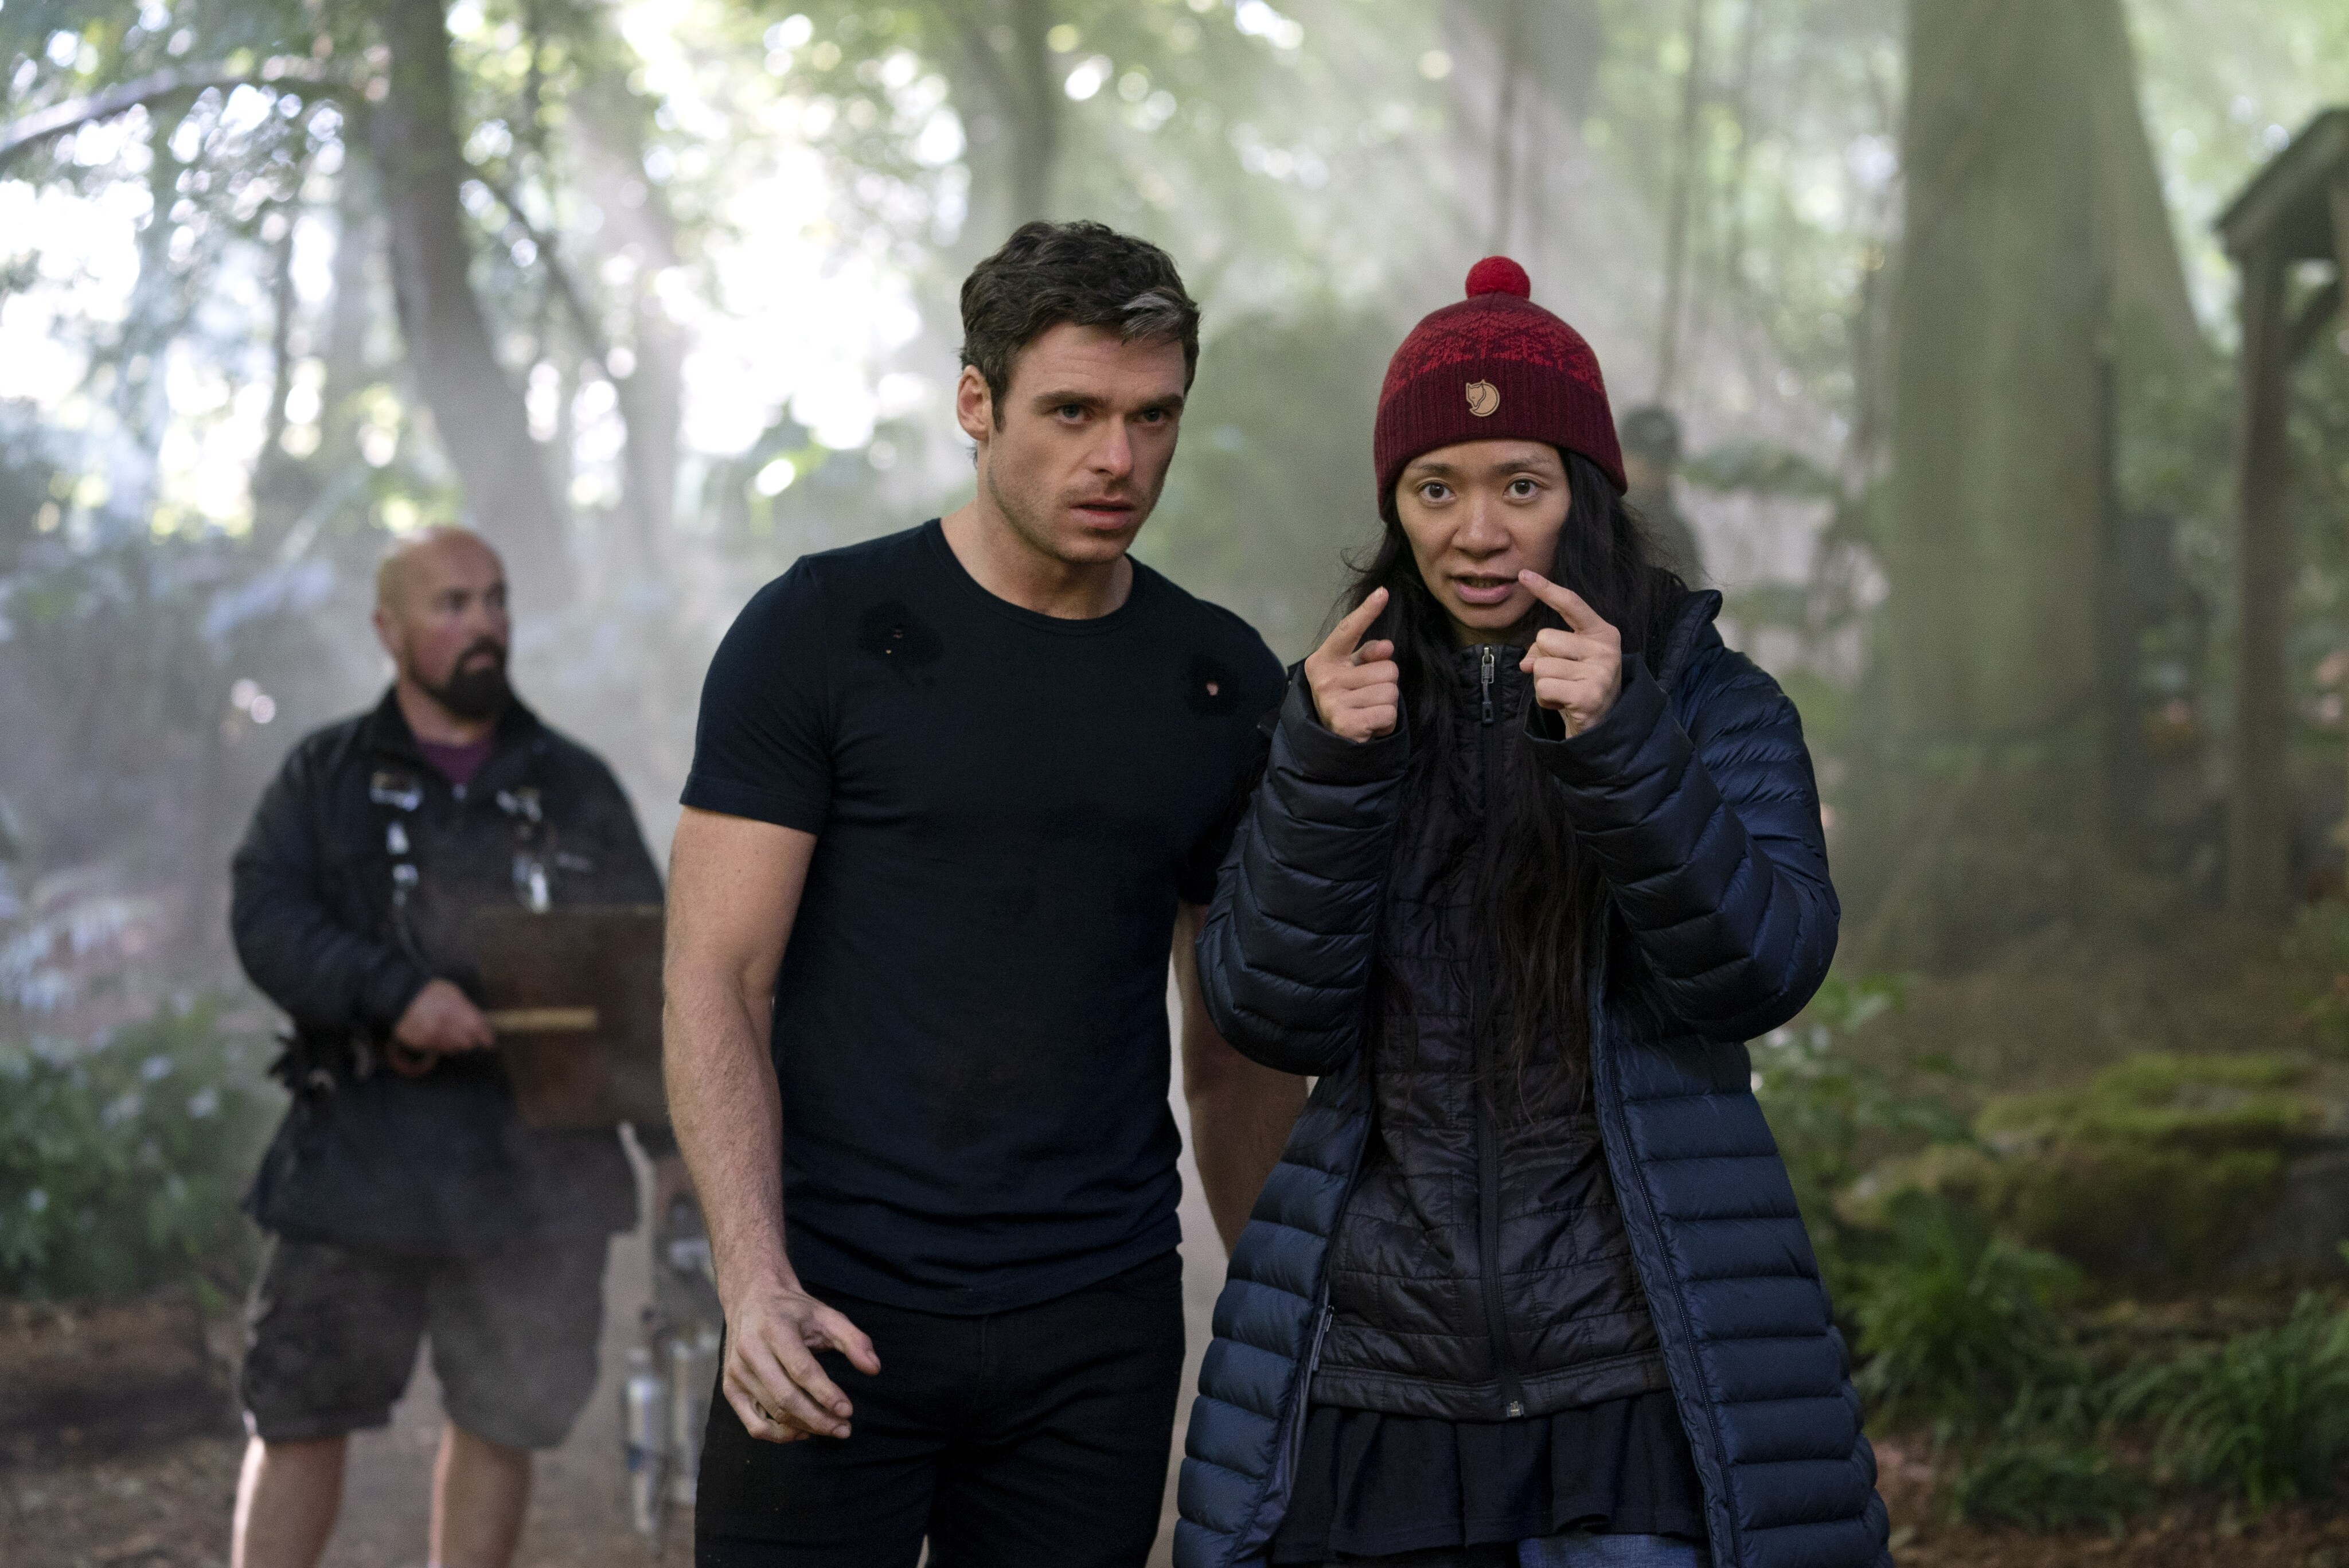 Richard Madden listens as Chloé Zhao directs in a forest setting. A crew member is visible in the background. Madden wears a black t-shirt and black jeans.